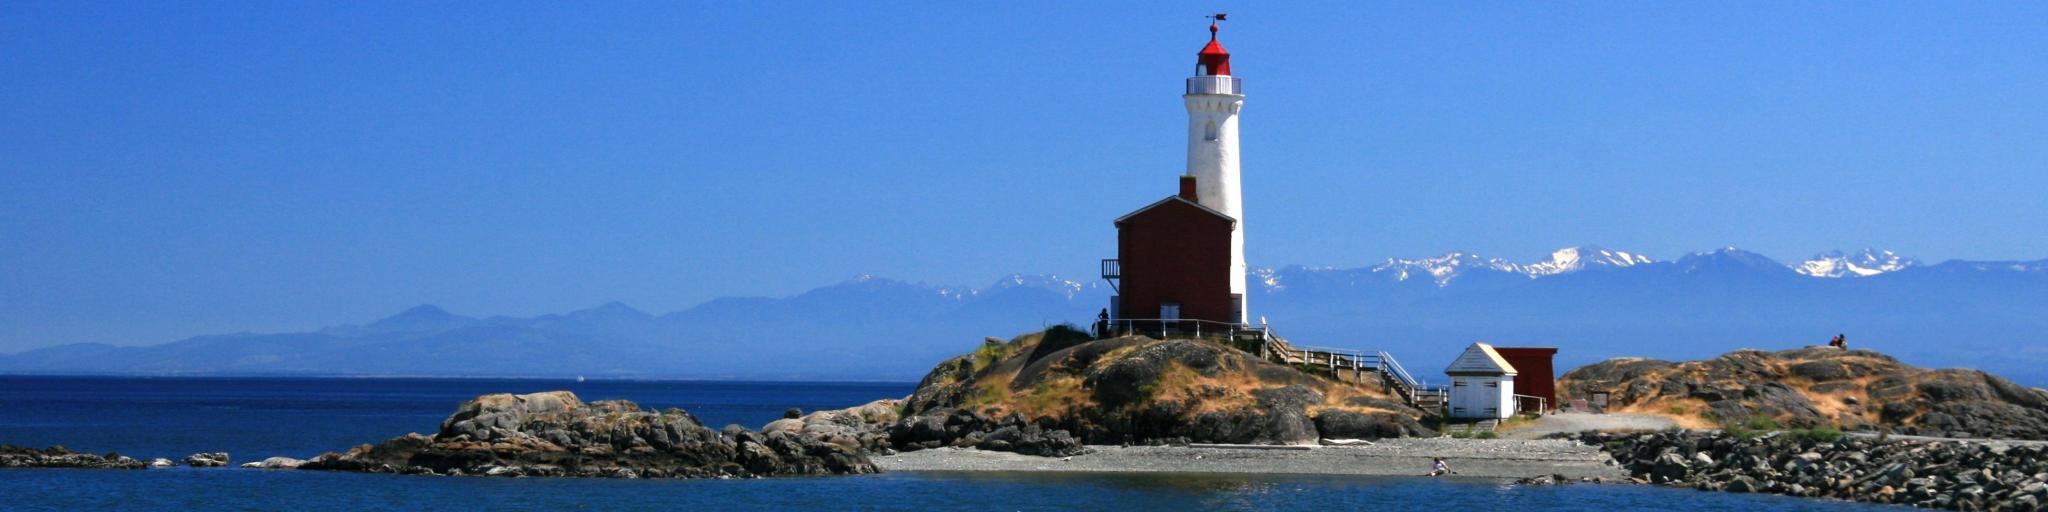 Beautiful lighthouse on a sunny day with mountains in the background in Victoria, Vancouver Island